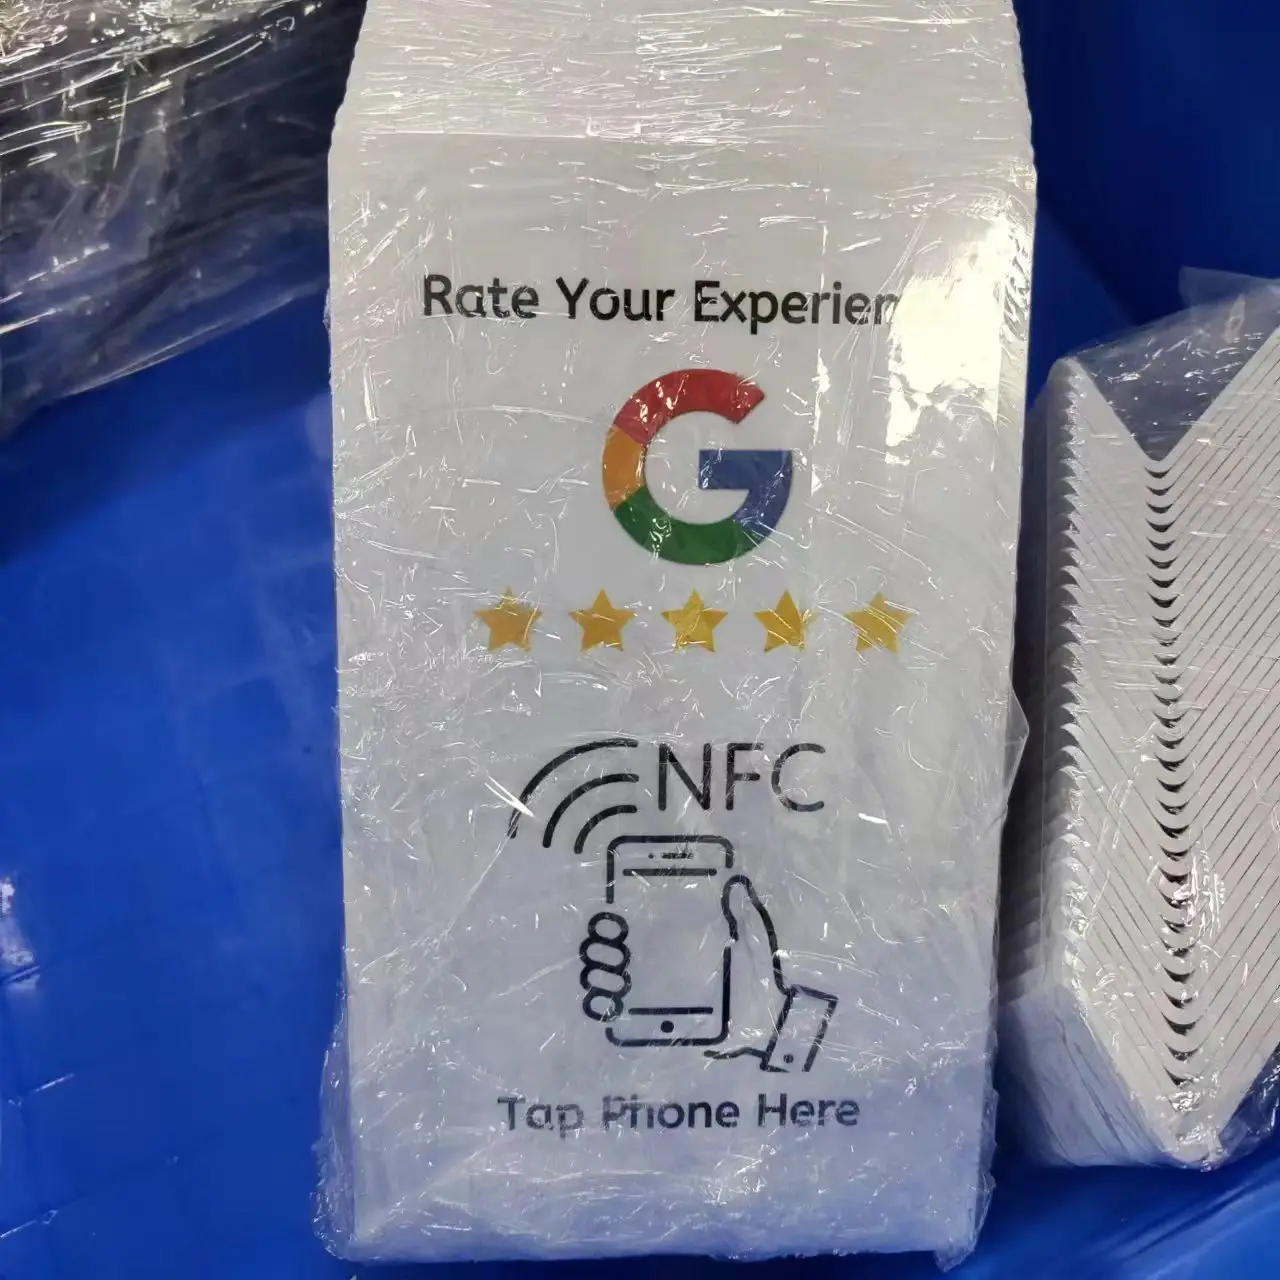 Google Review Stand NFC Card NTAG213 215 for Ins/Facebook/Yelp/Tripadvisor restaurant